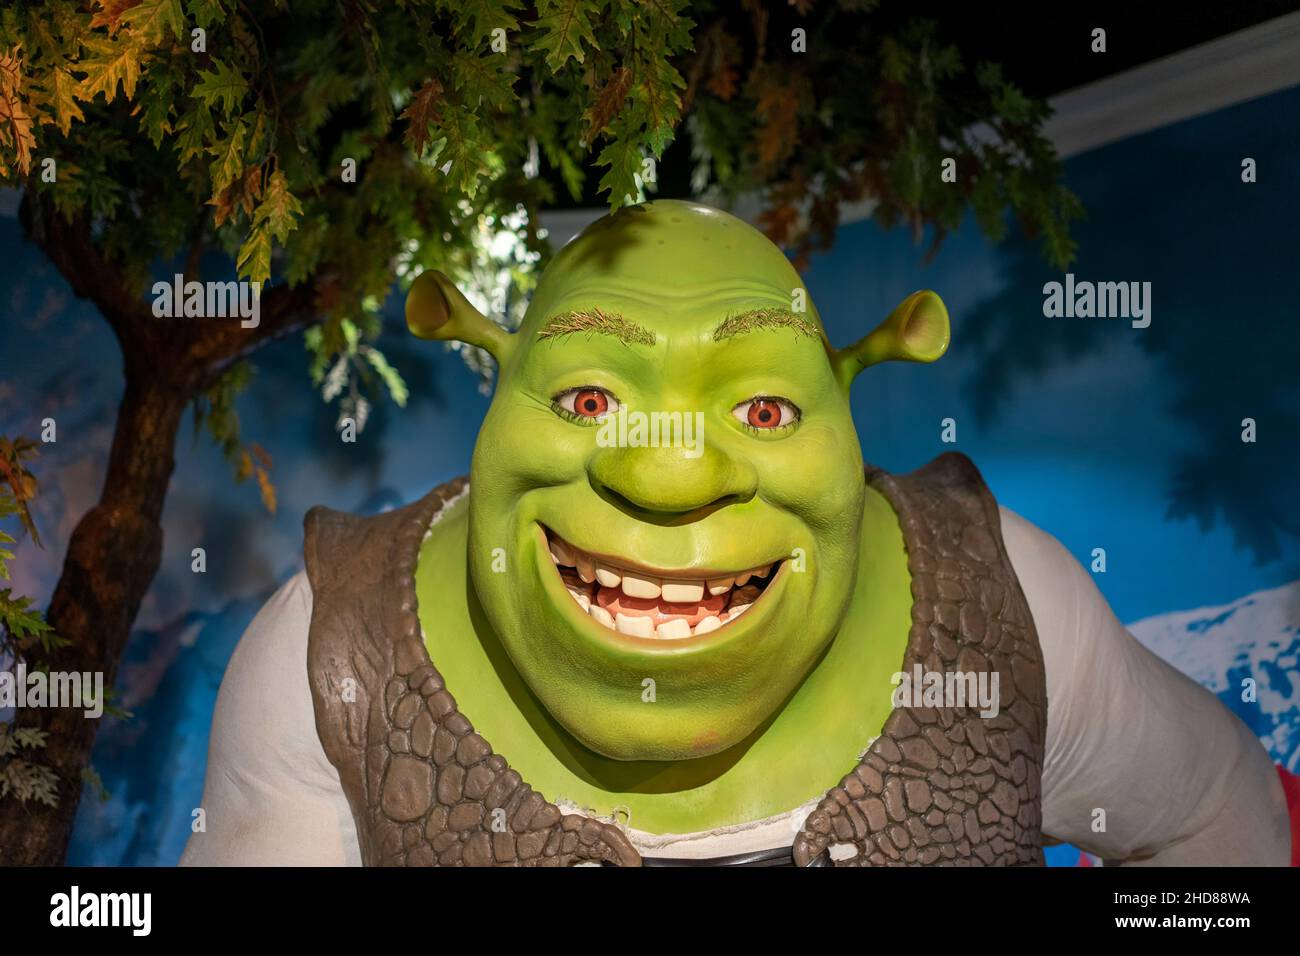 Shrek wax statue at Madame Tussauds museum in Istanbul. Stock Photo